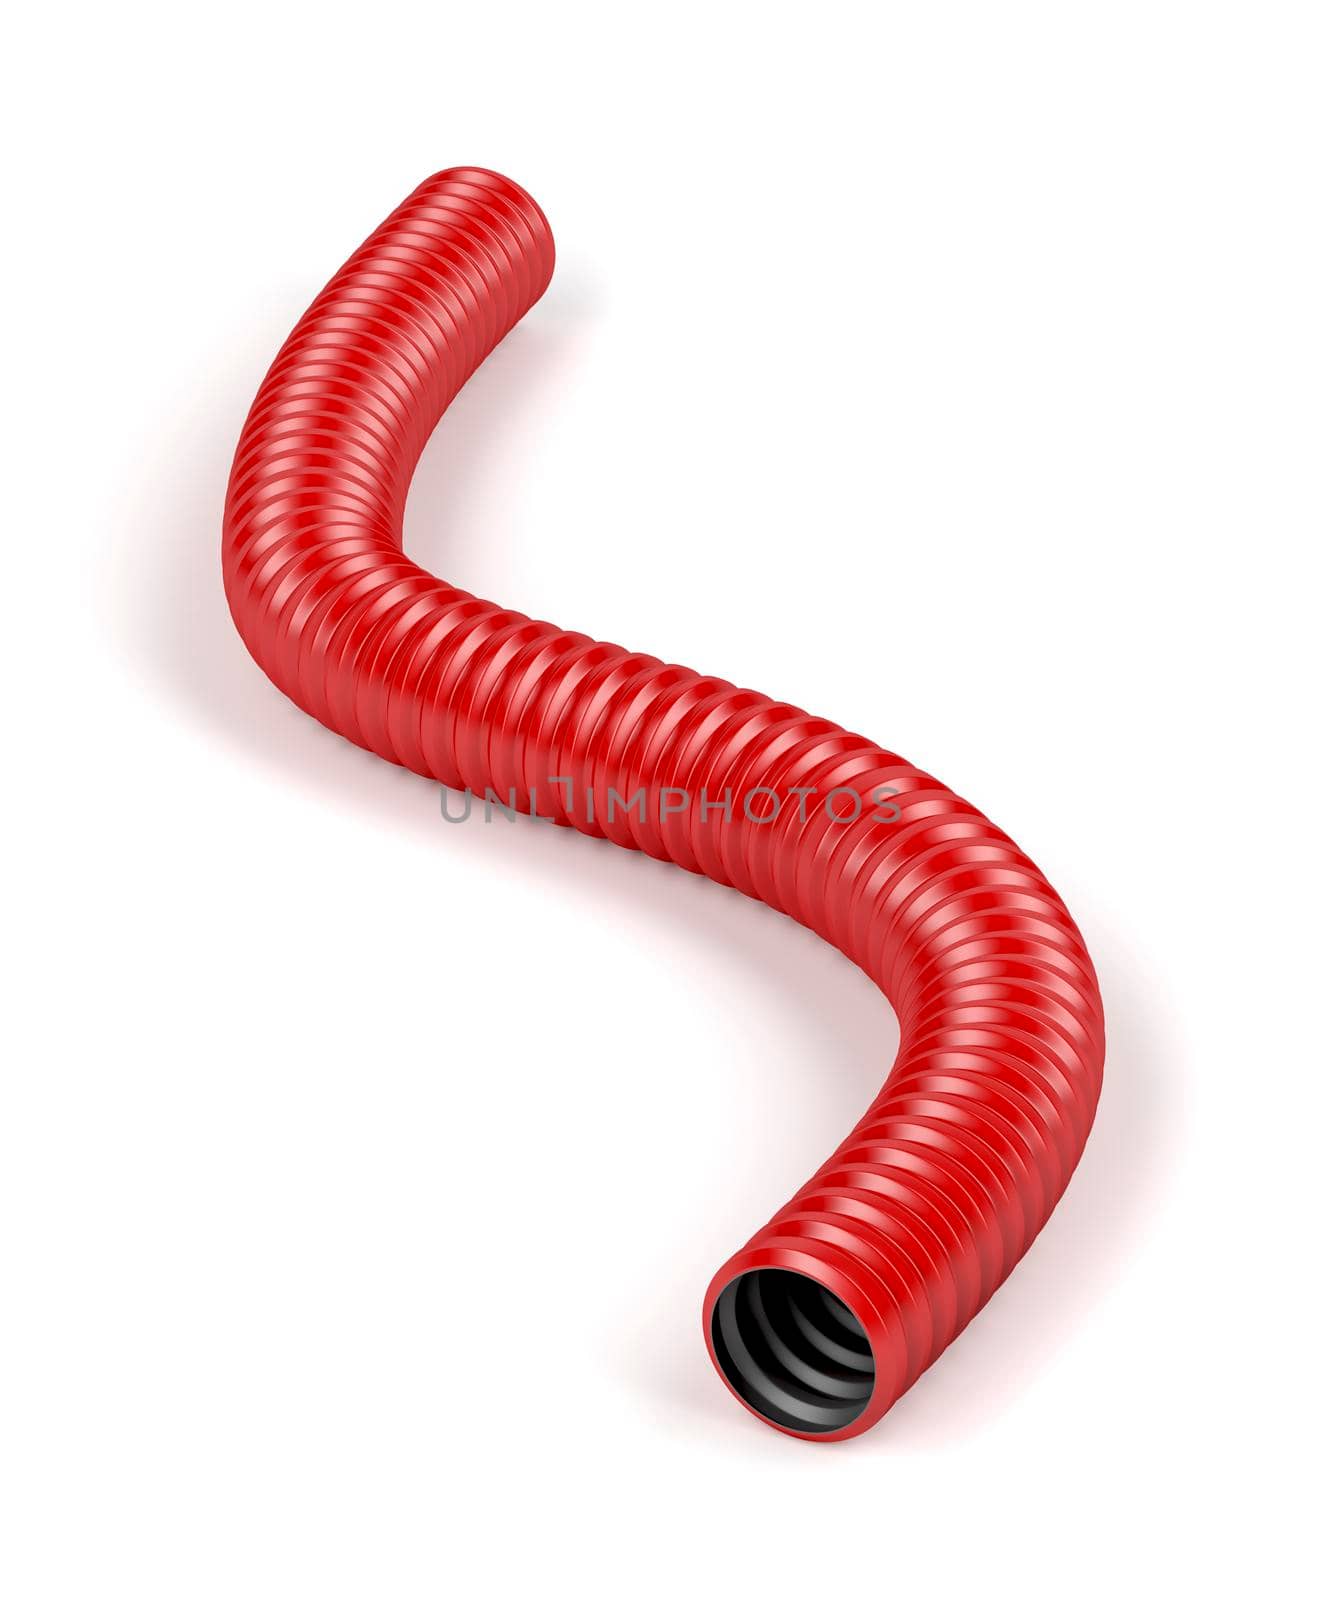 Corrugated red pipe by magraphics